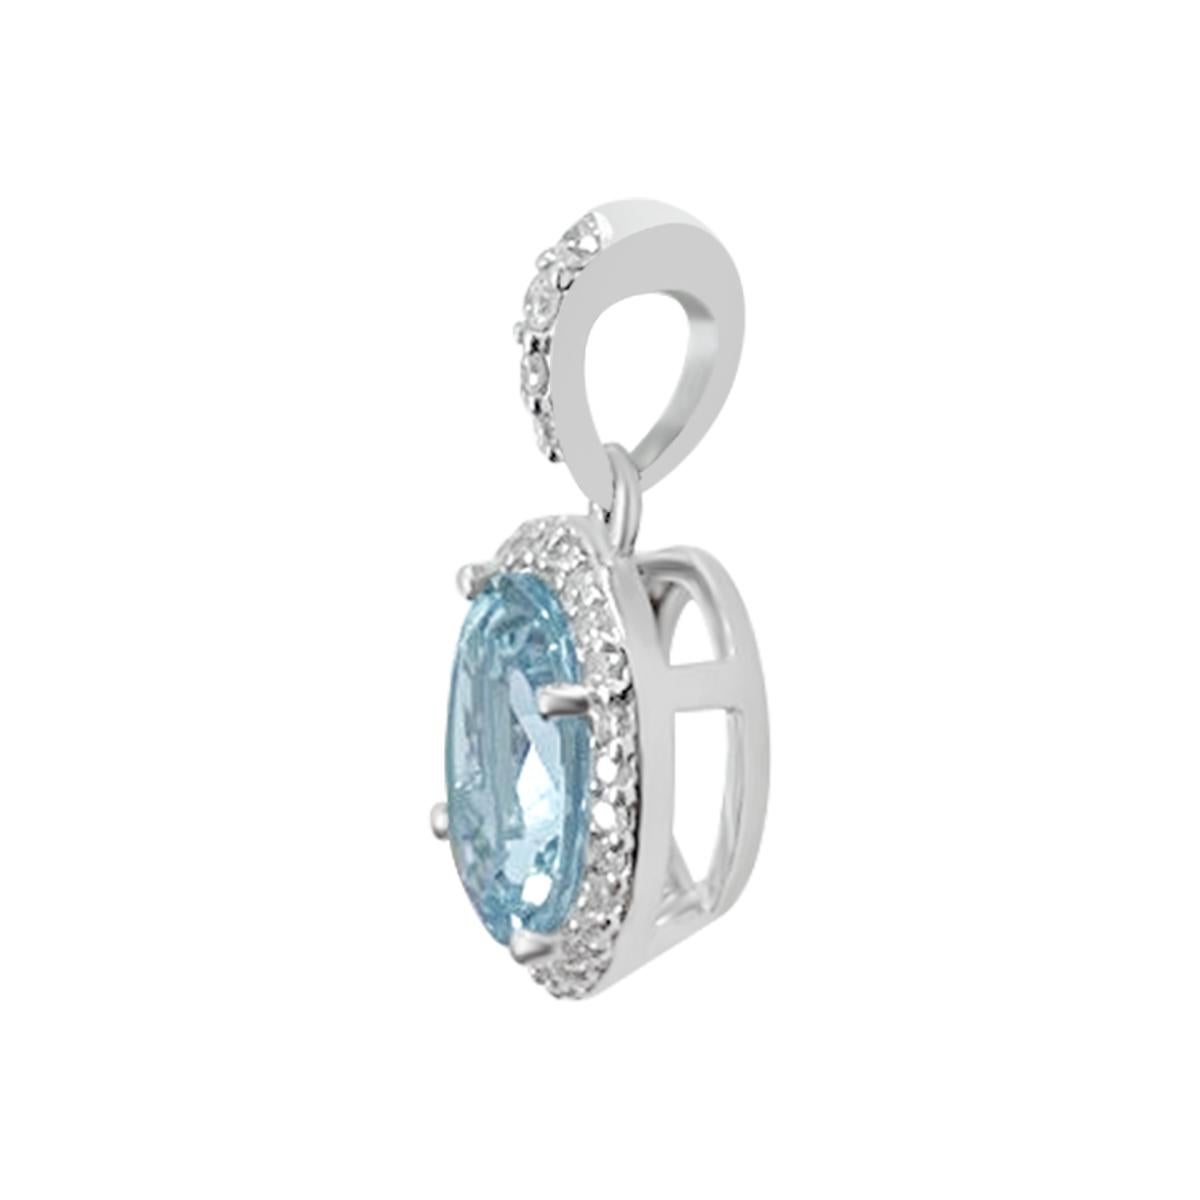 The Beautiful Stones Are Handset In Smooth 14K White Gold For This Amazing 9x7mm Oval Brilliant Cut 1.45Cts Aquamarine Gemstone Pendant With Diamonds.
Jewel Of Excellent Quality And Great Elegance.

Style# TS1030AQP
Aquamarine: Oval 9x7mm